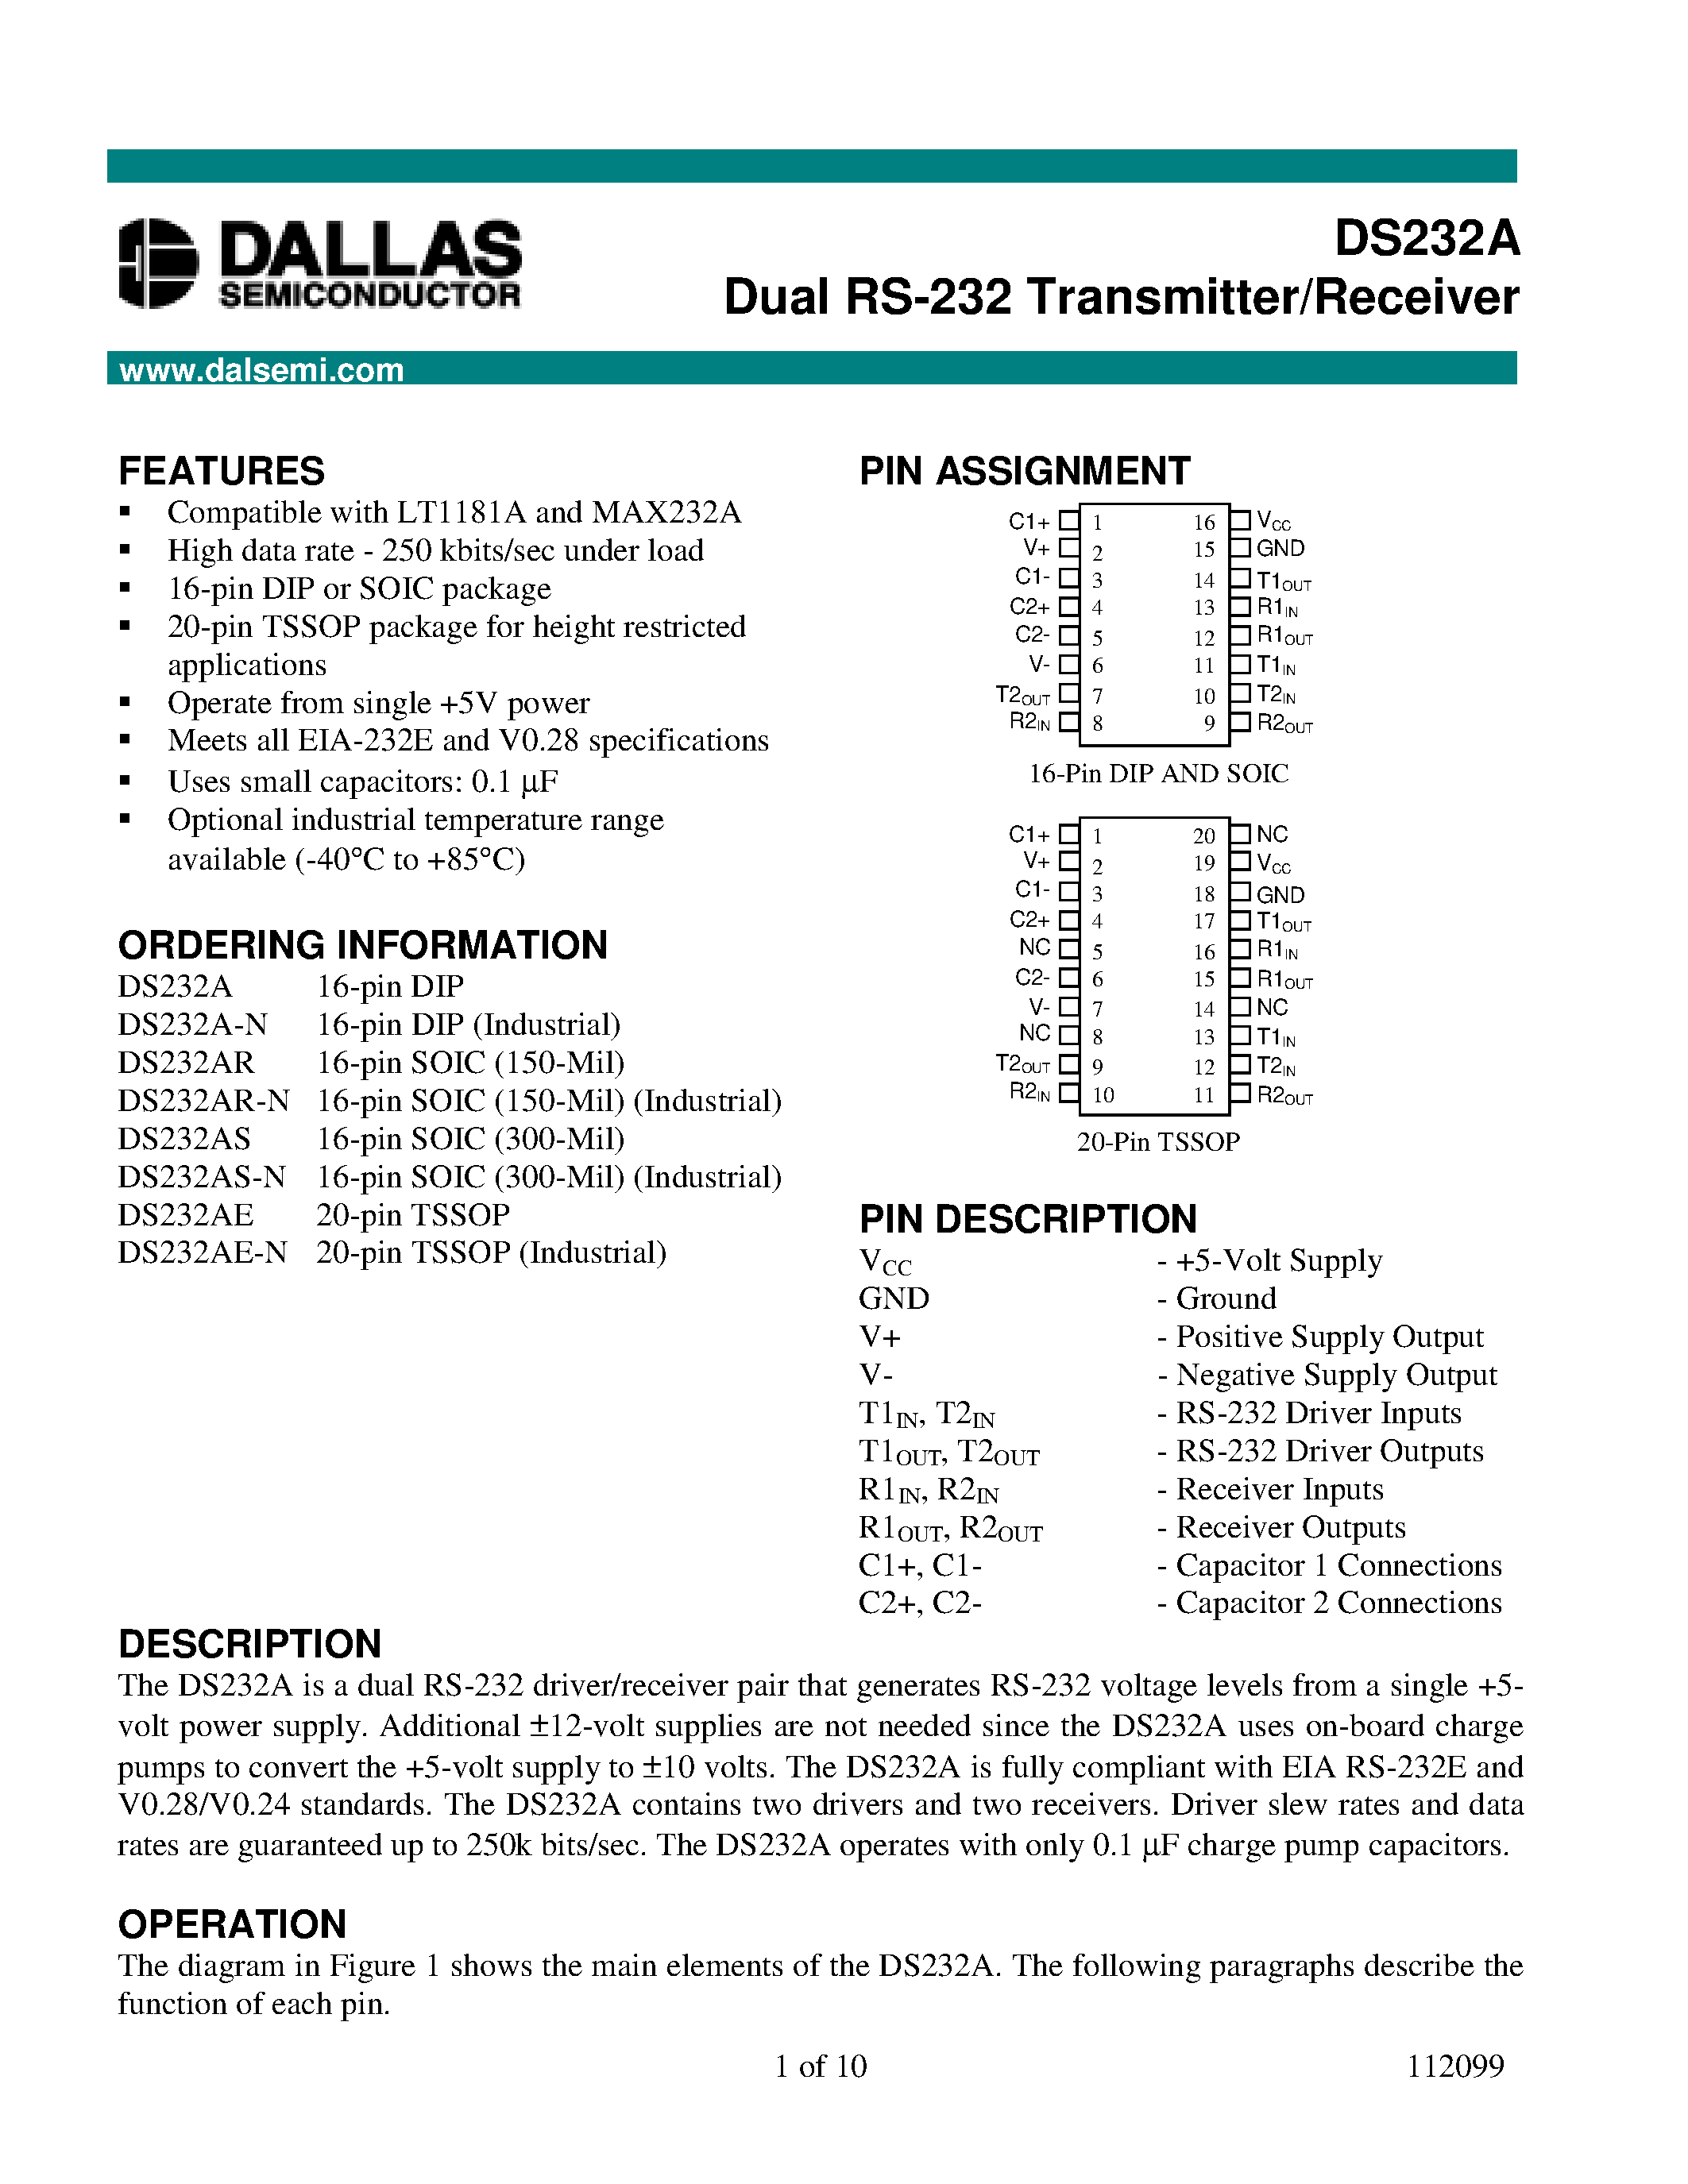 Даташит DS232AR-N - Dual RS-232 Transmitter/Receiver страница 1